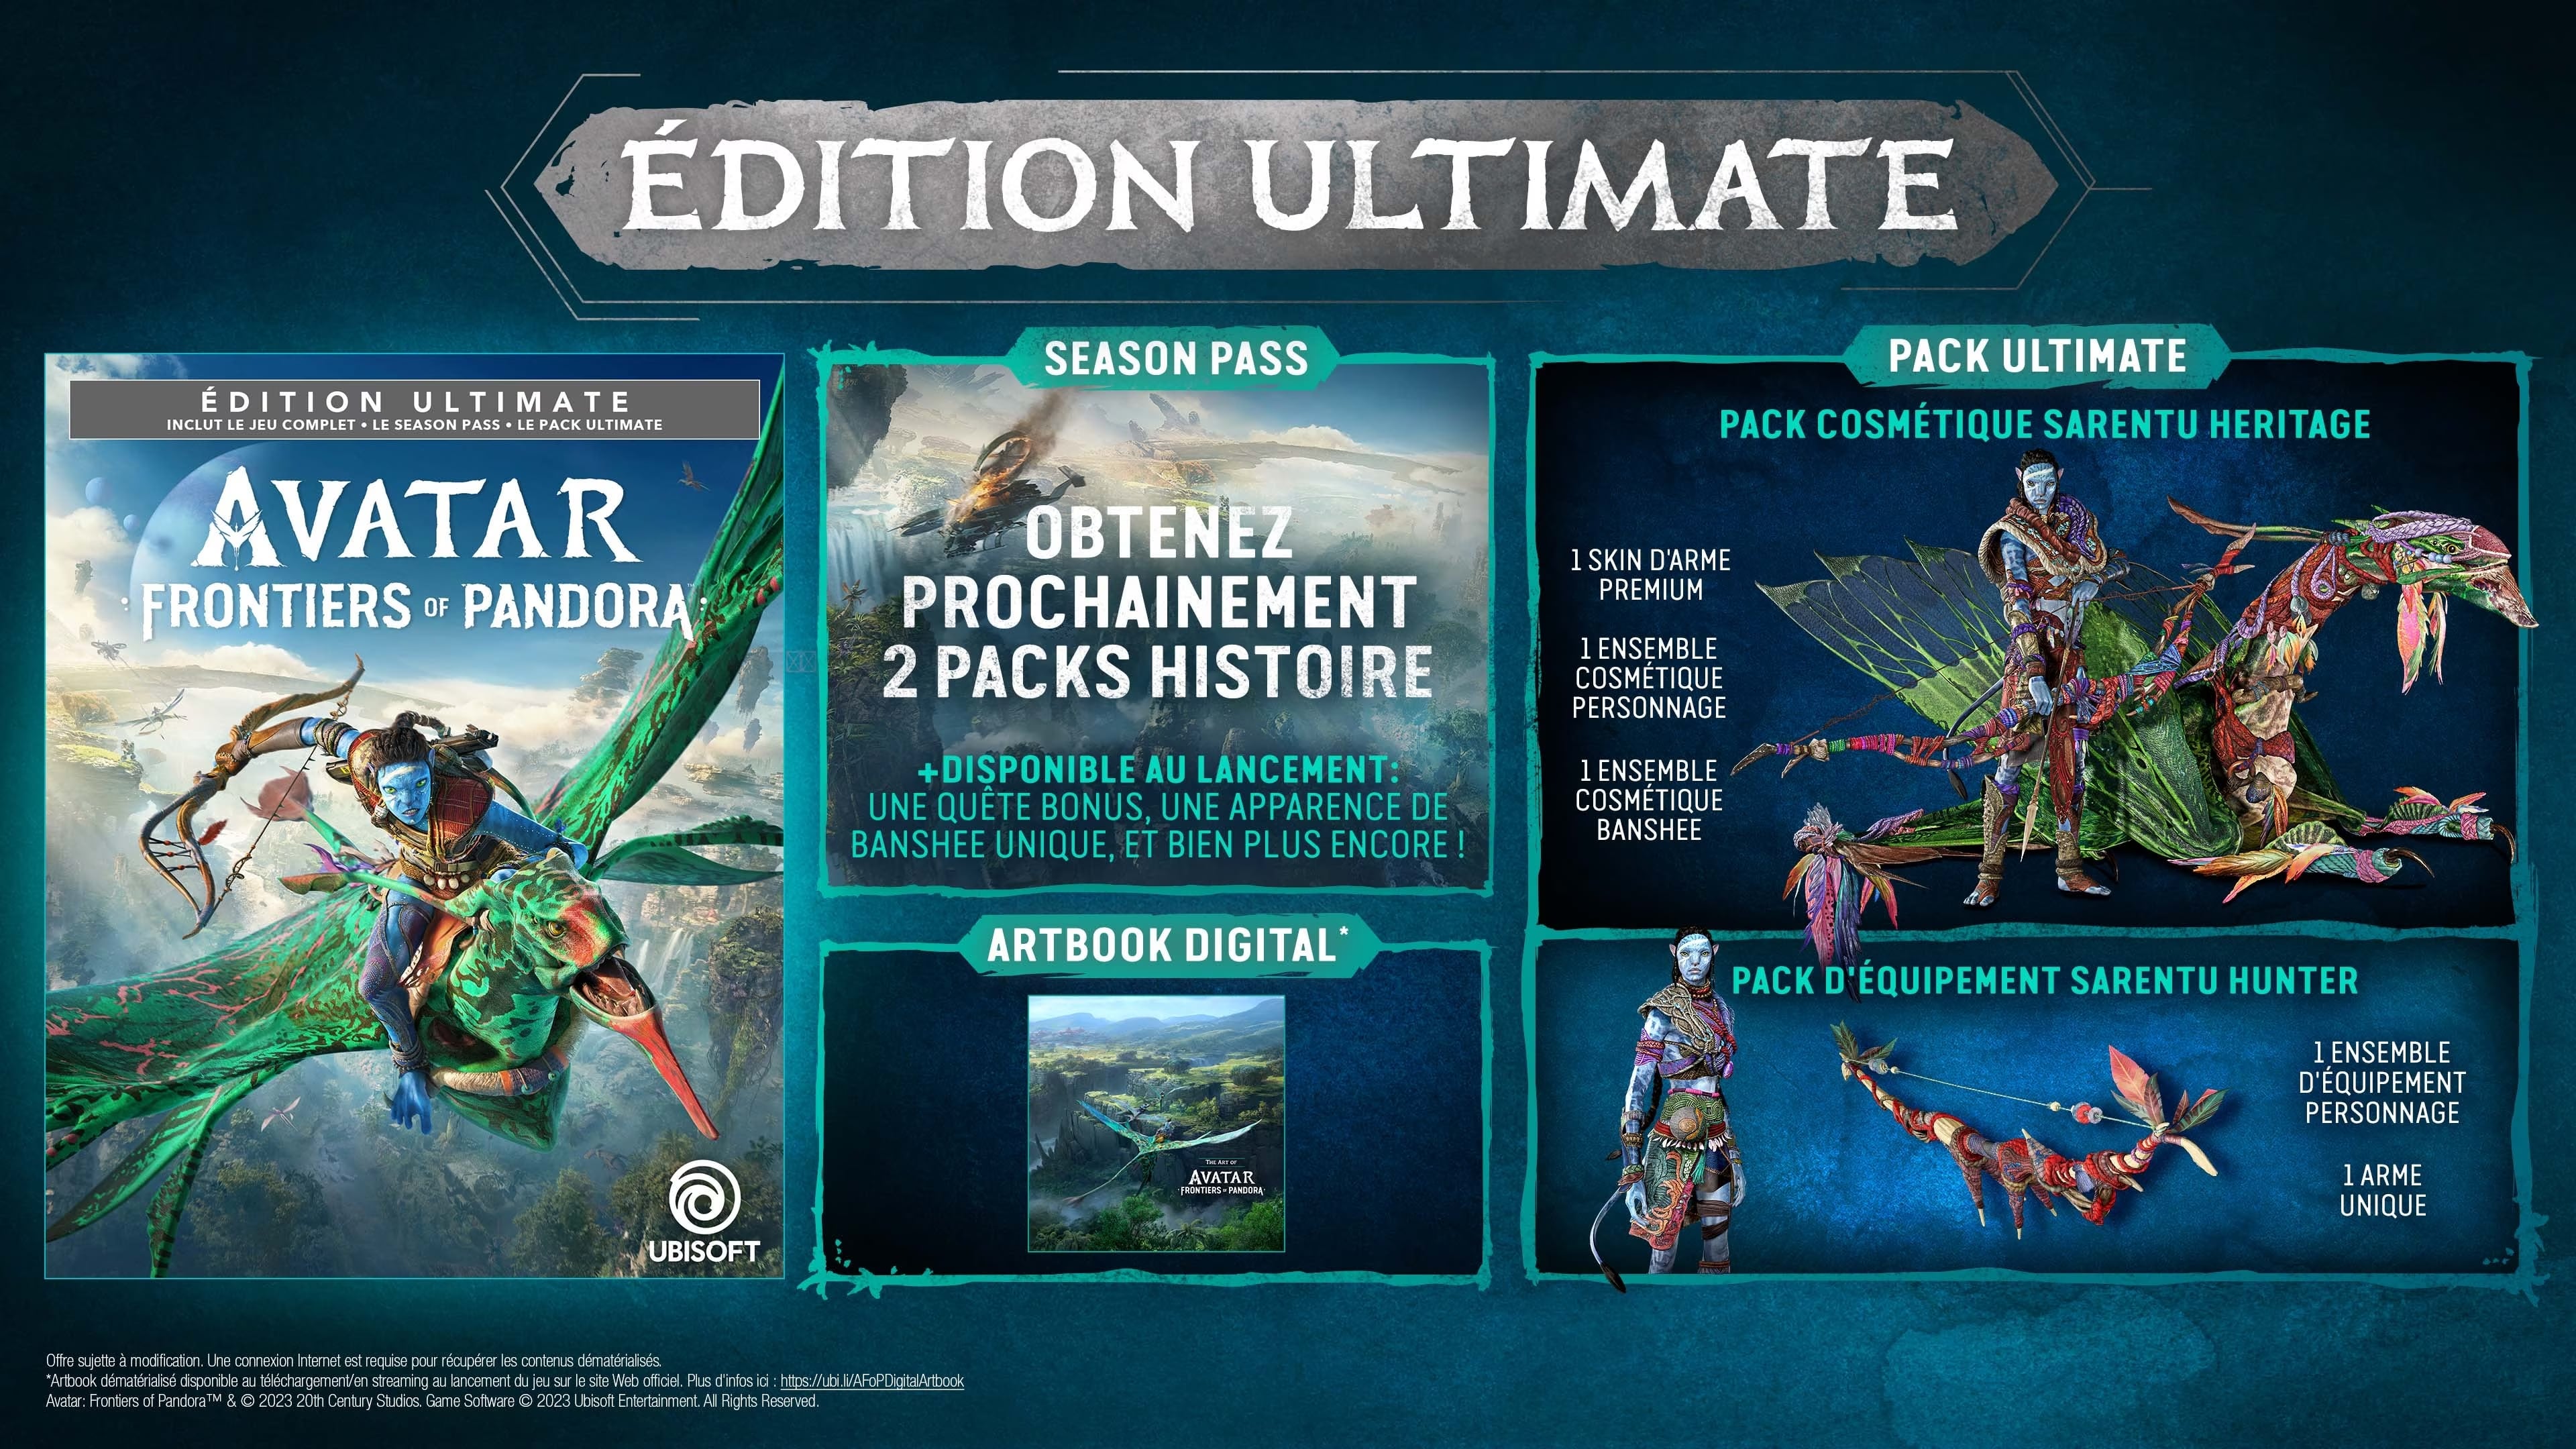 Edition ultimate avatar frontiers of pandora 2